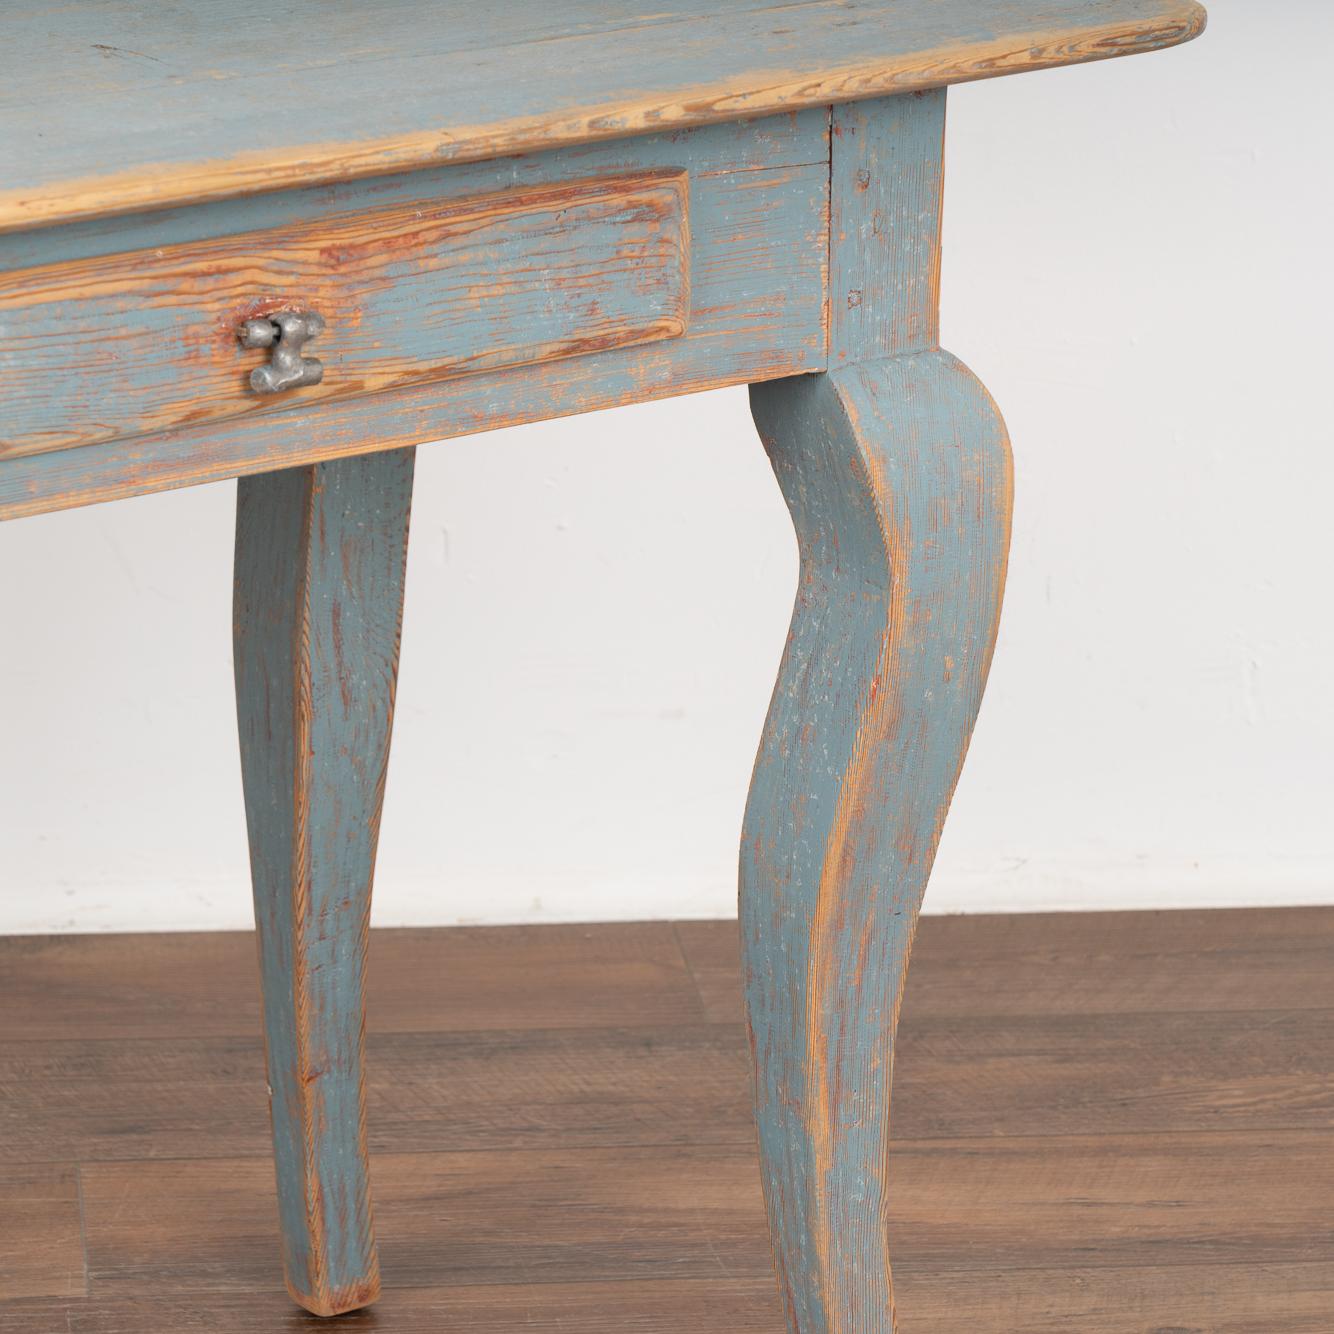 Blue Painted Pine Side Table With Cabriolet Legs, Sweden circa 1820-40 For Sale 2